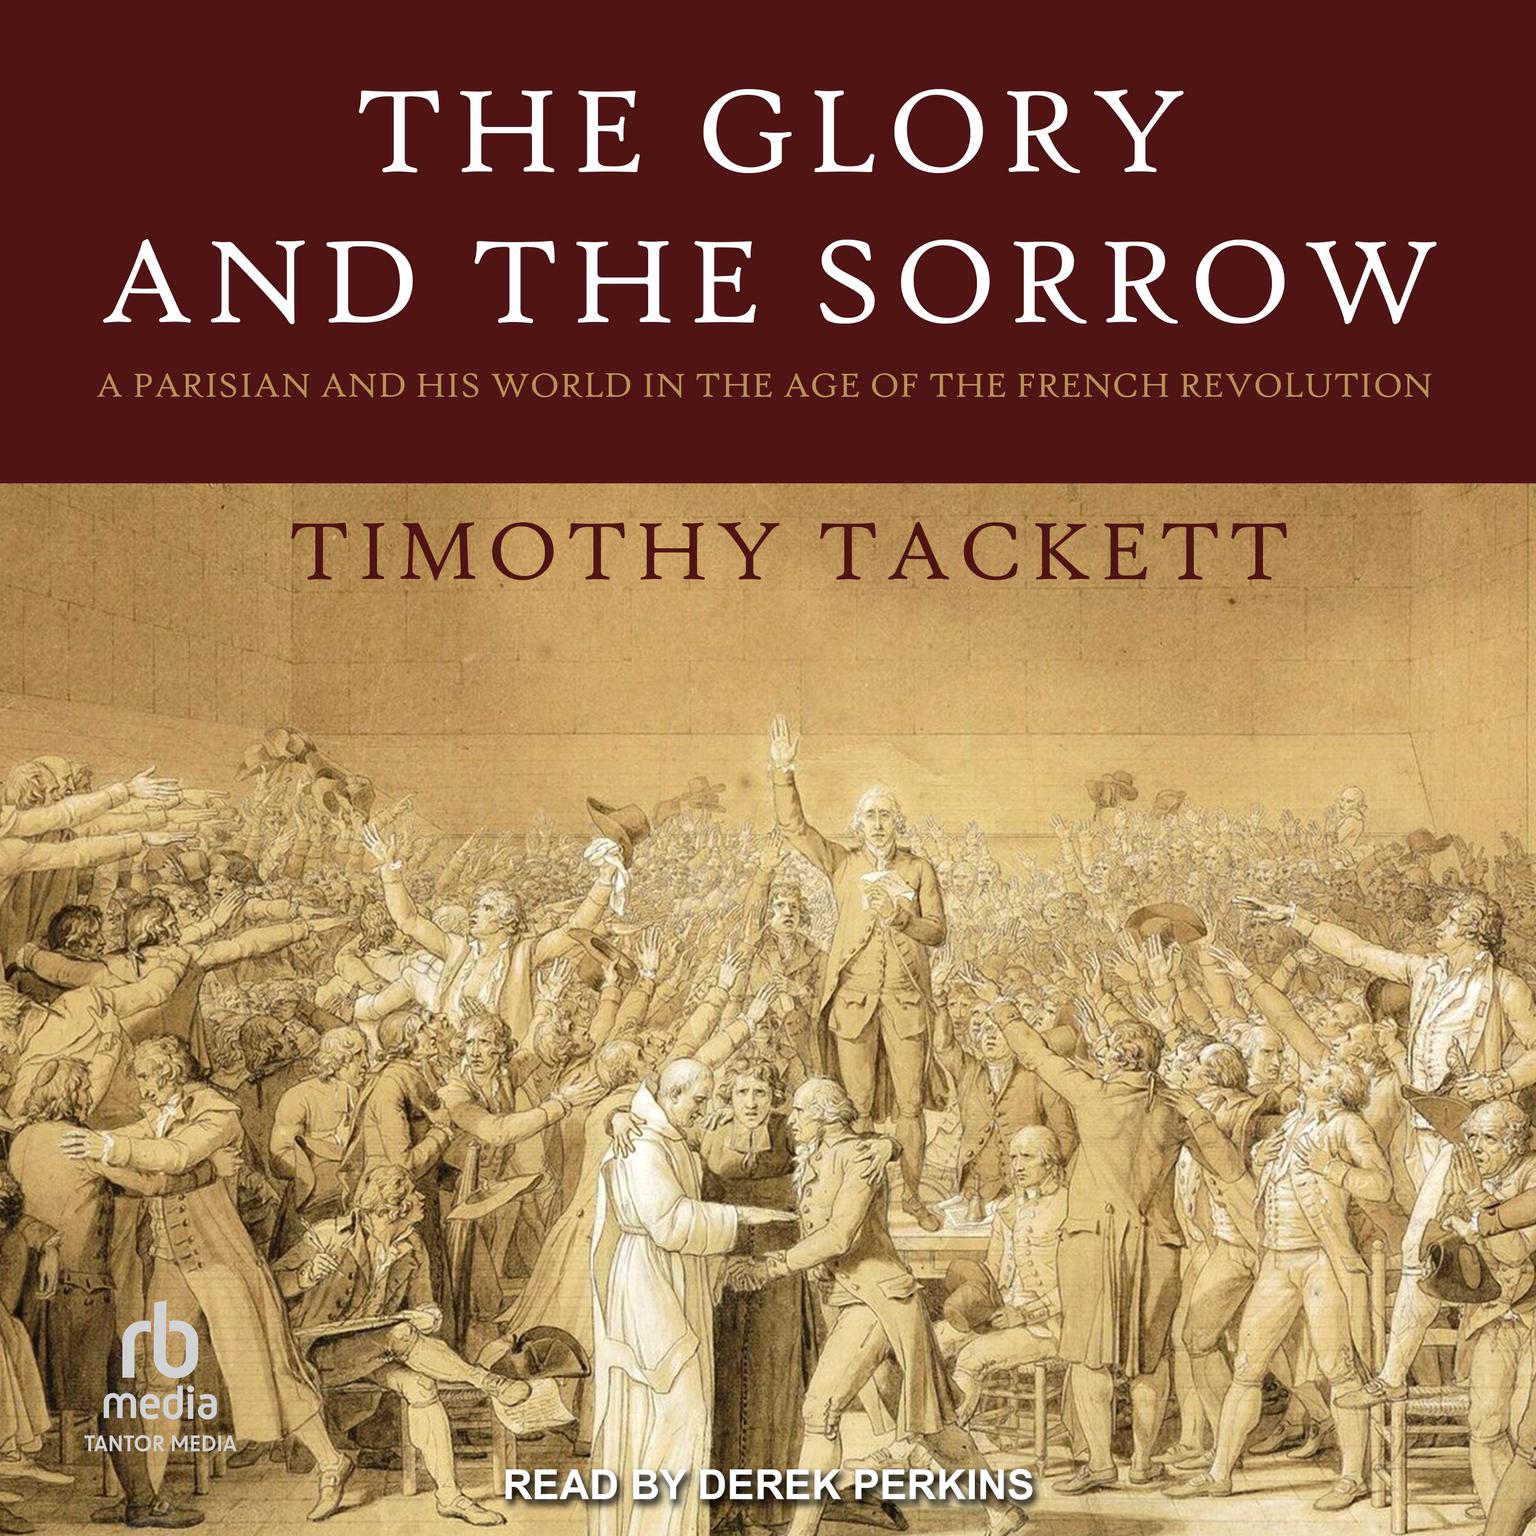 The Glory and the Sorrow: A Parisian and His World in the Age of the French Revolution Audiobook, by Timothy Tackett